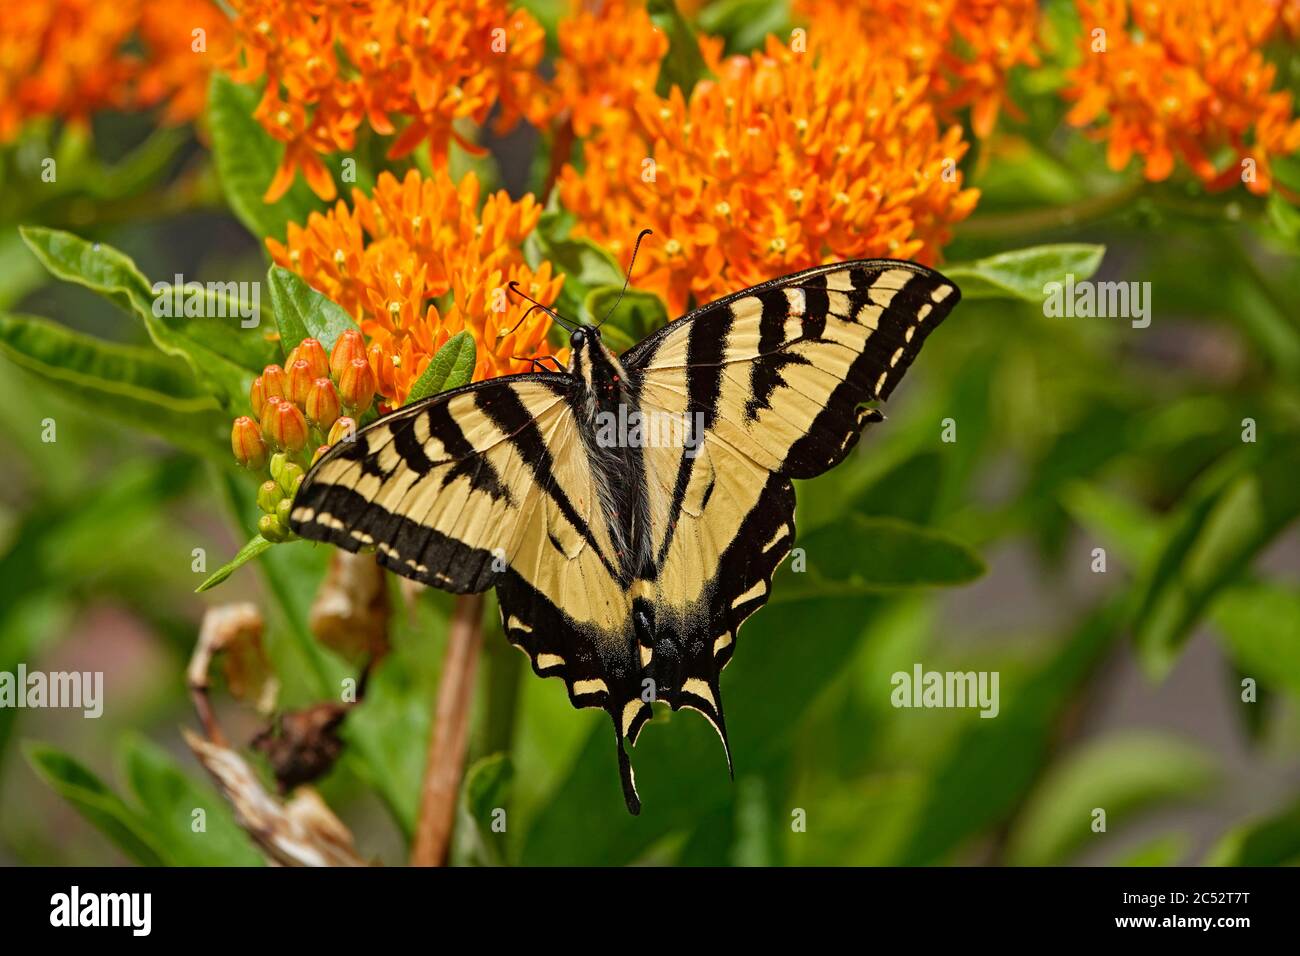 A western tiger swallowtail butterfly sipping nectar from a flower in a large flower garden in the Willamette Valley, Oregon. Stock Photo